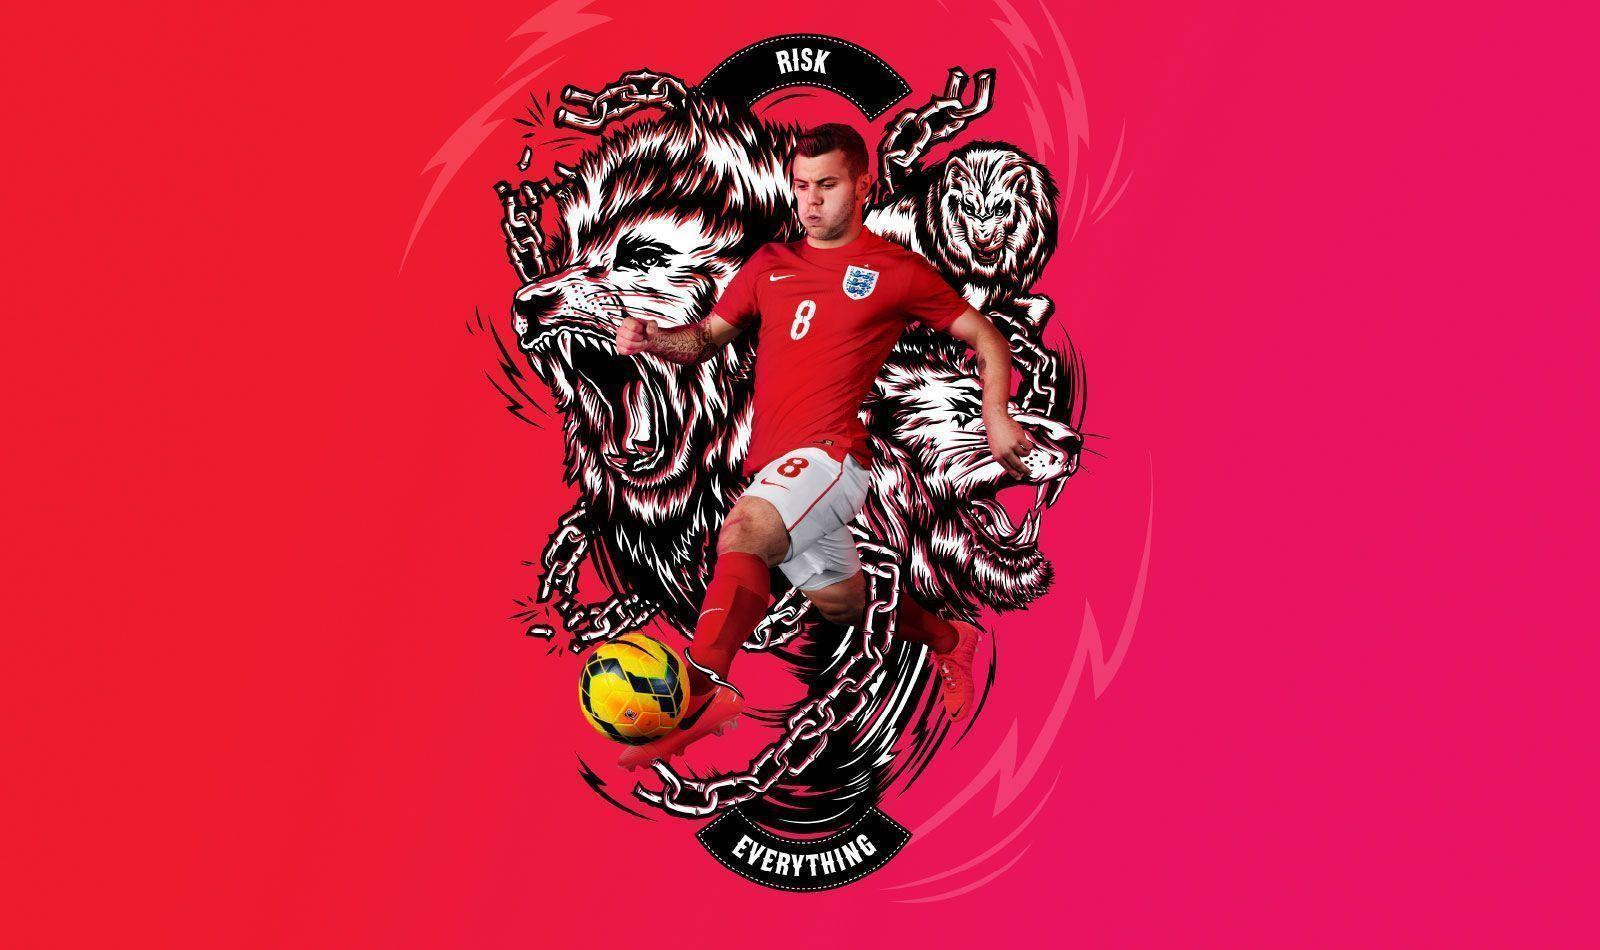 Spectacular Nike Risk Everything 2014 World Cup Kit Wallpaper